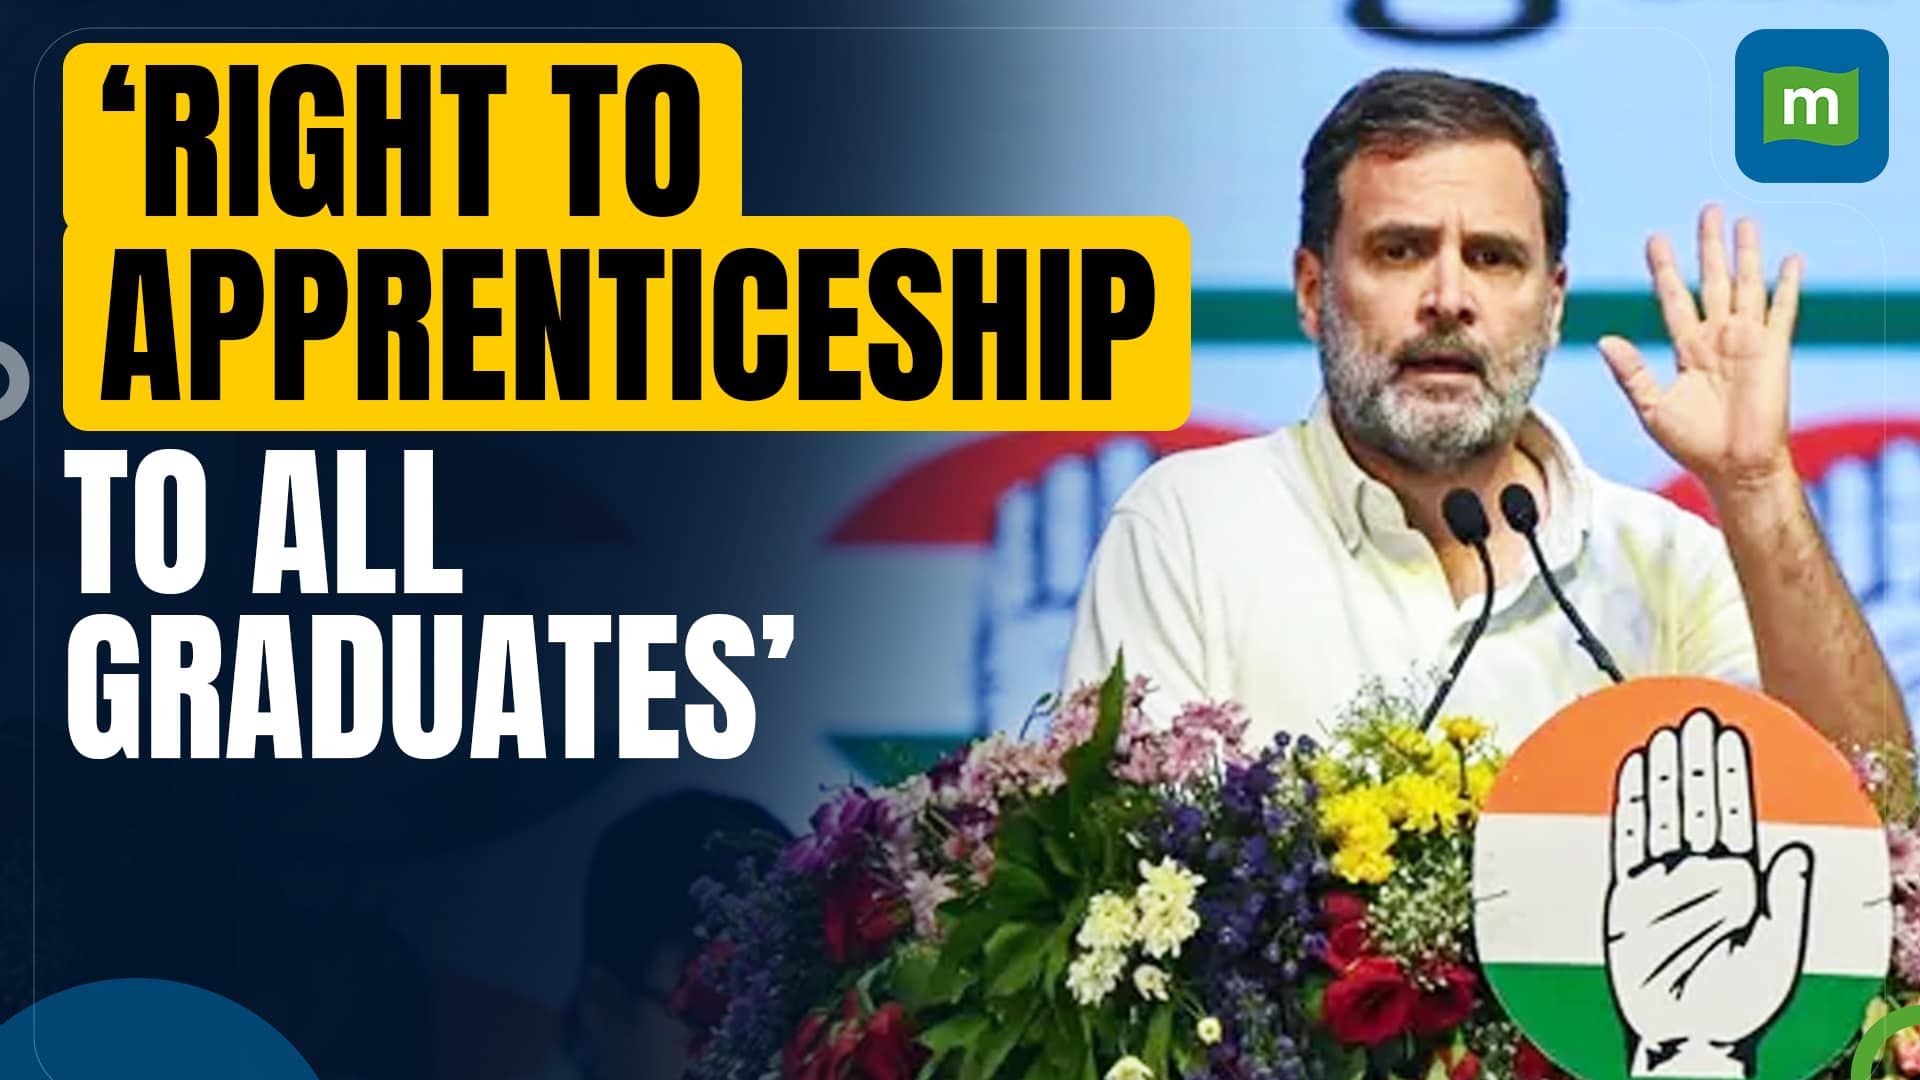 Rahul Gandhi accuses PM Modi of ending the employment system | Political news